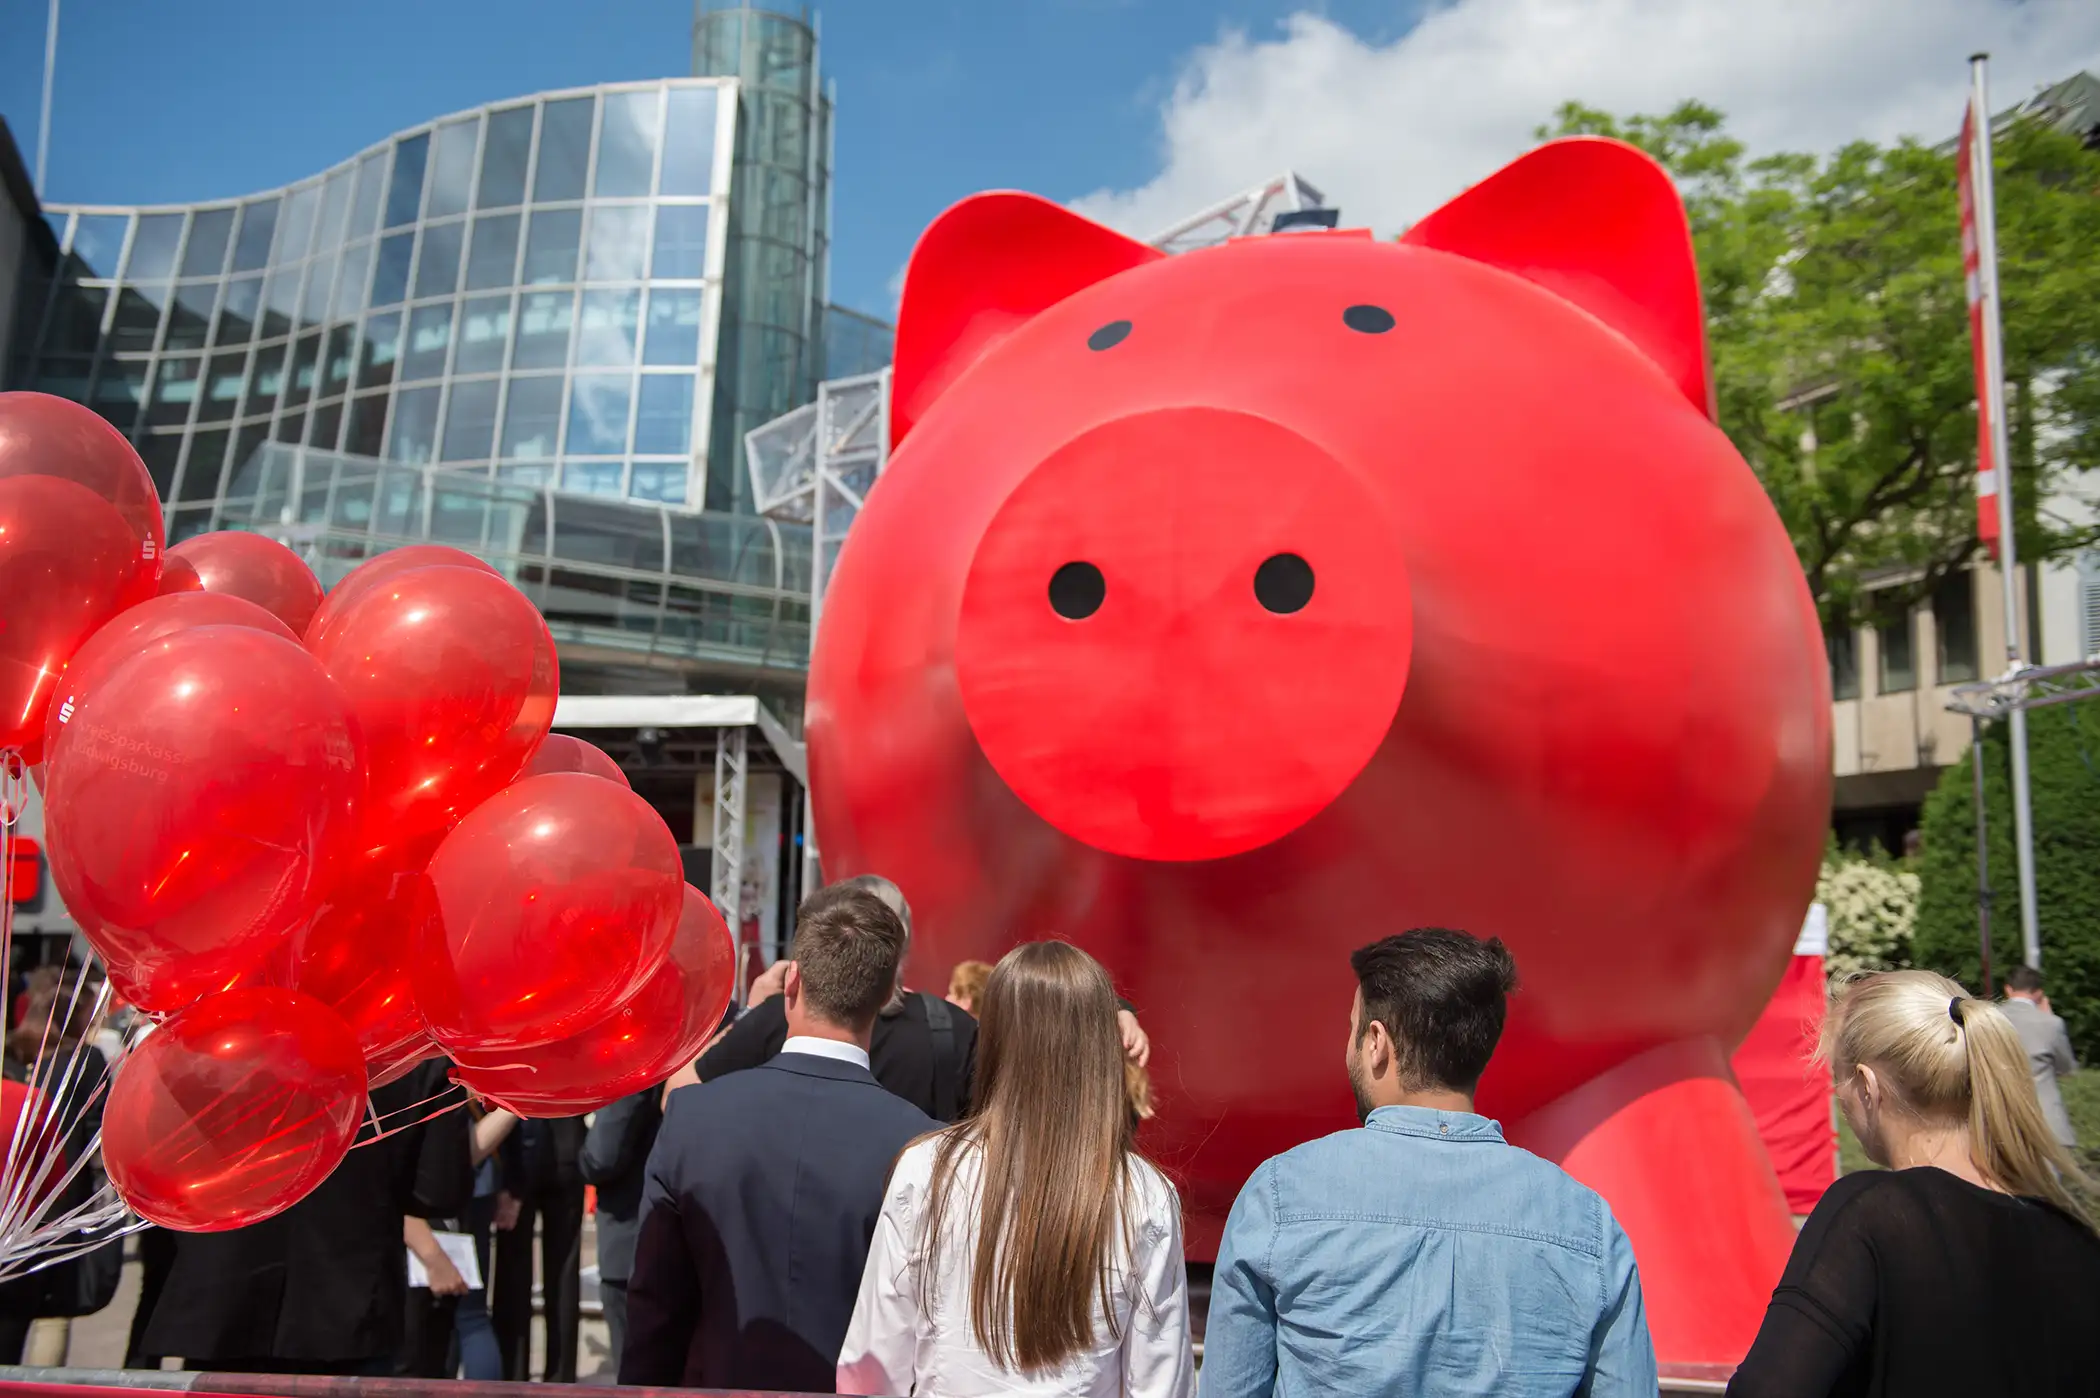 Spectators look on as the 'world's largest piggy bank' is being unveiled during a ceremony at Schillerplatz in Ludwigsburg, Germany, 18 May 2015. The two-story tall piggy bank was designed to motivate people to save money.